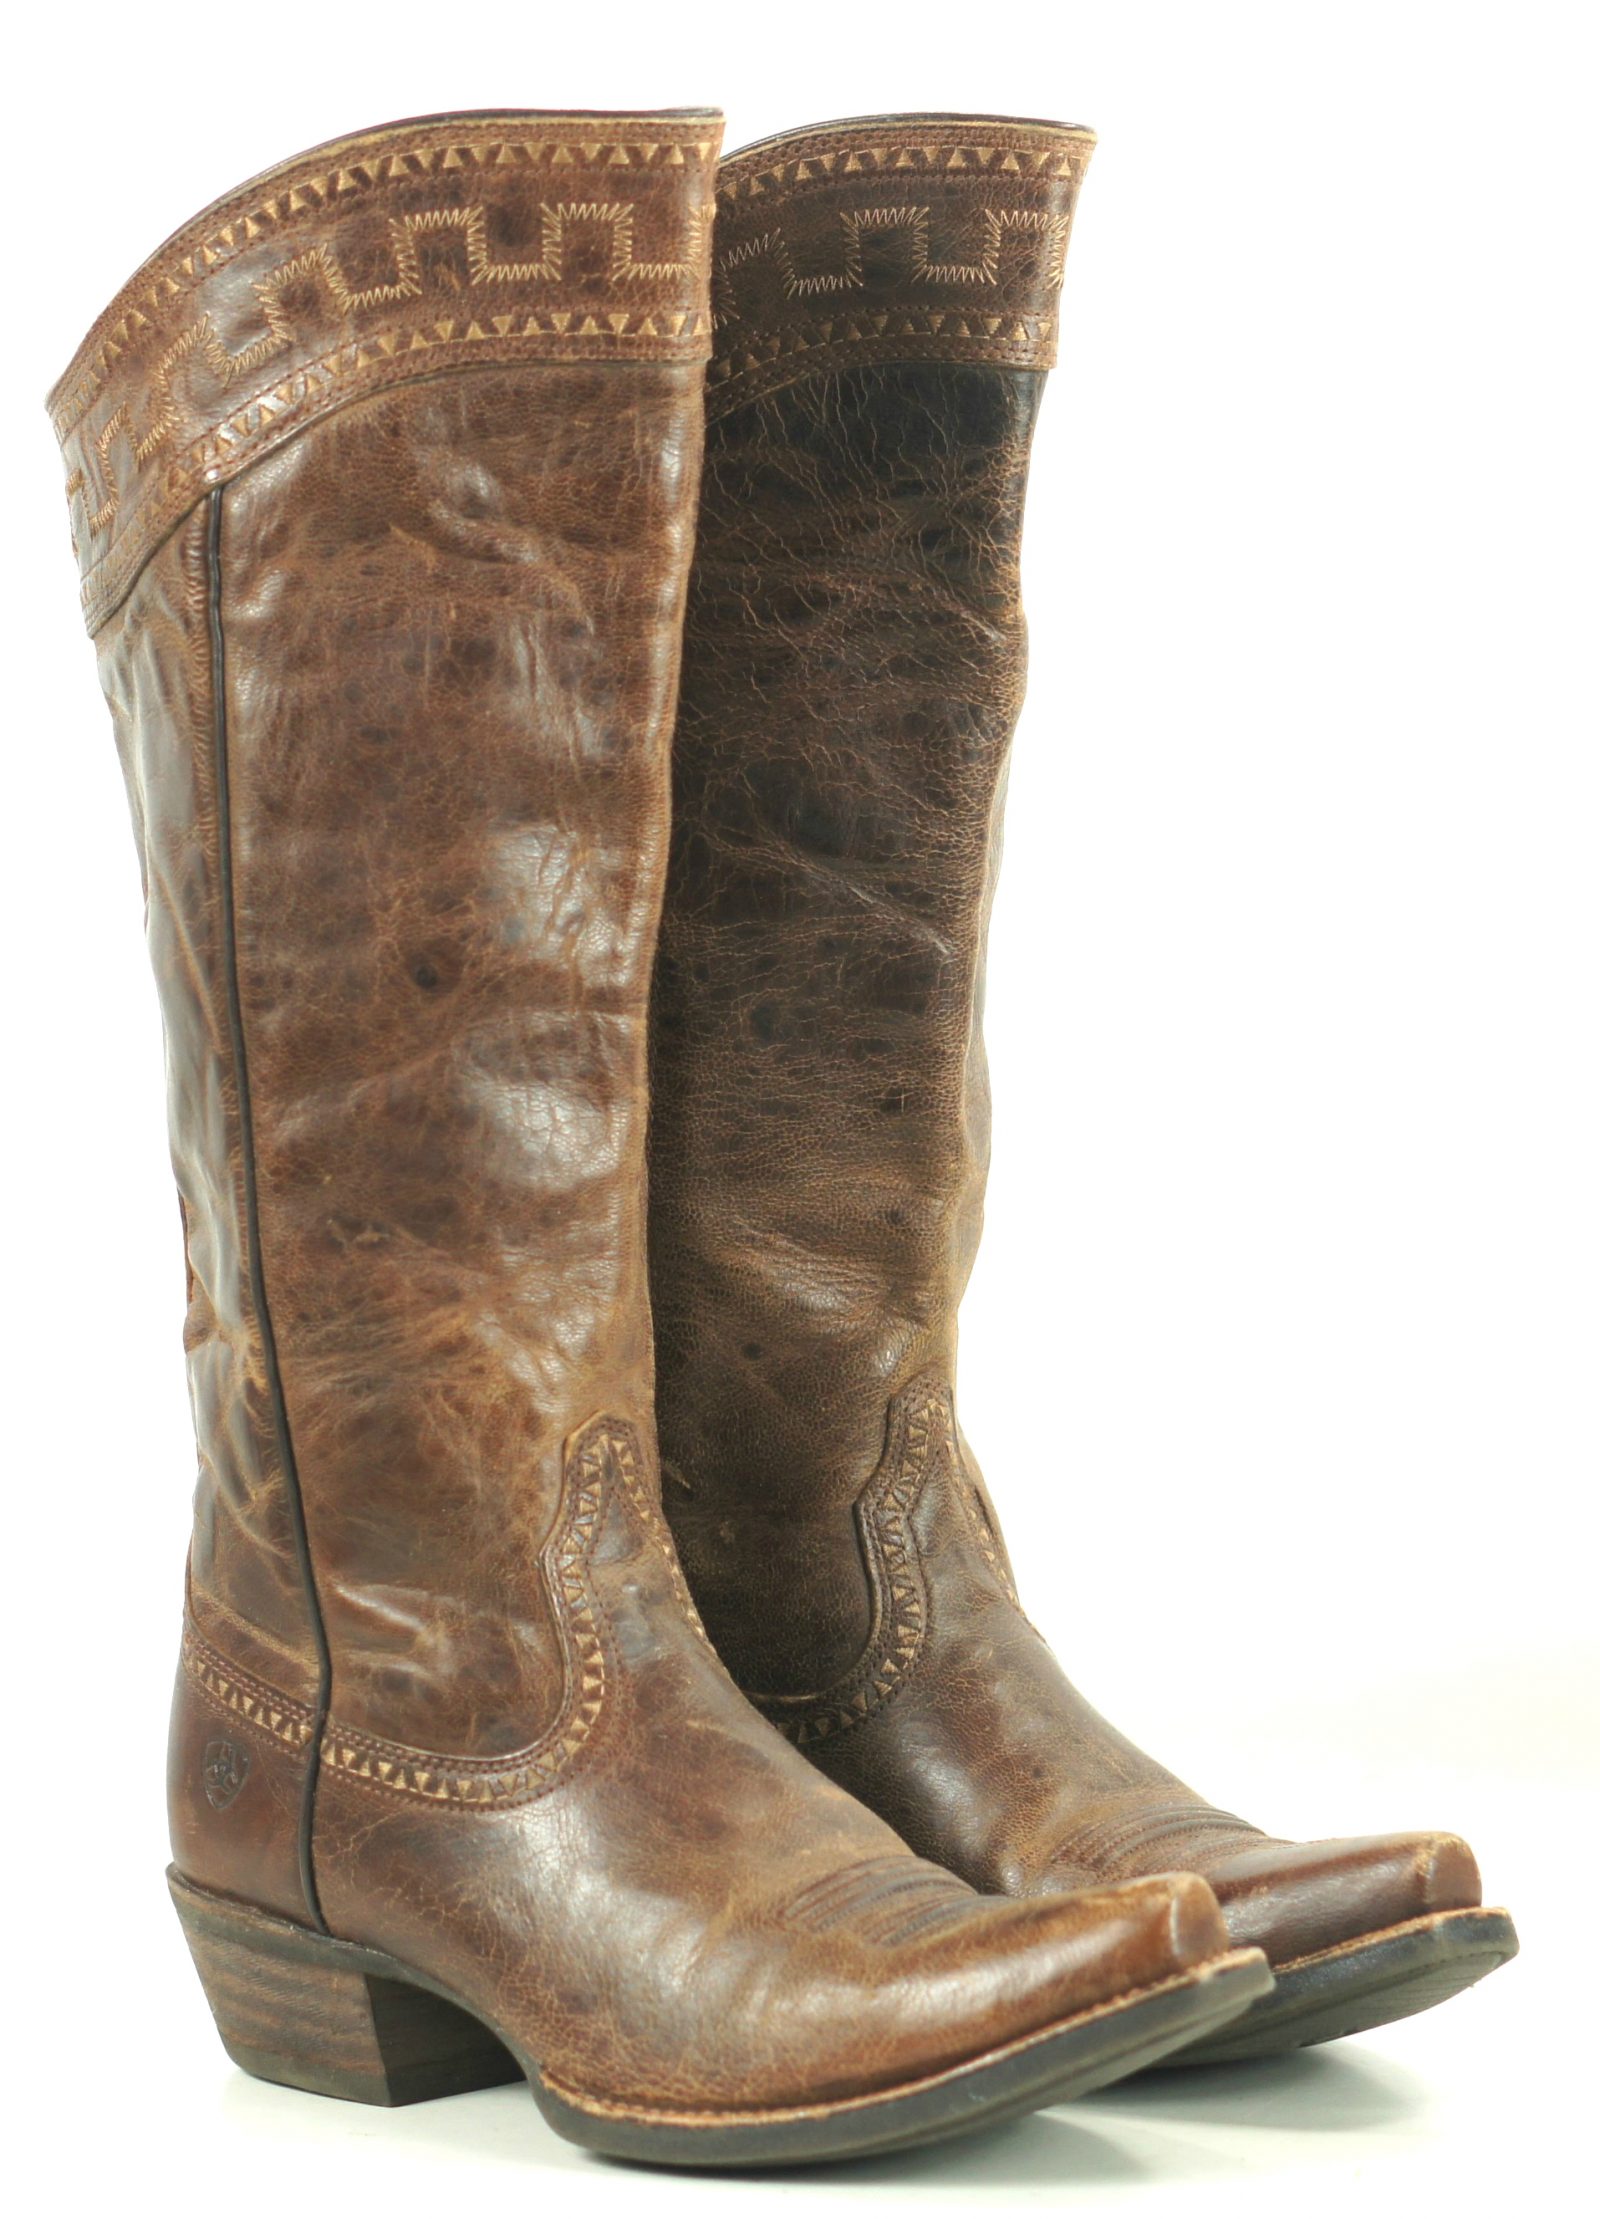 Ariat Sahara Brown Leather 17 Tall Knee Hi Riding Boots Discontinued Womens (4)